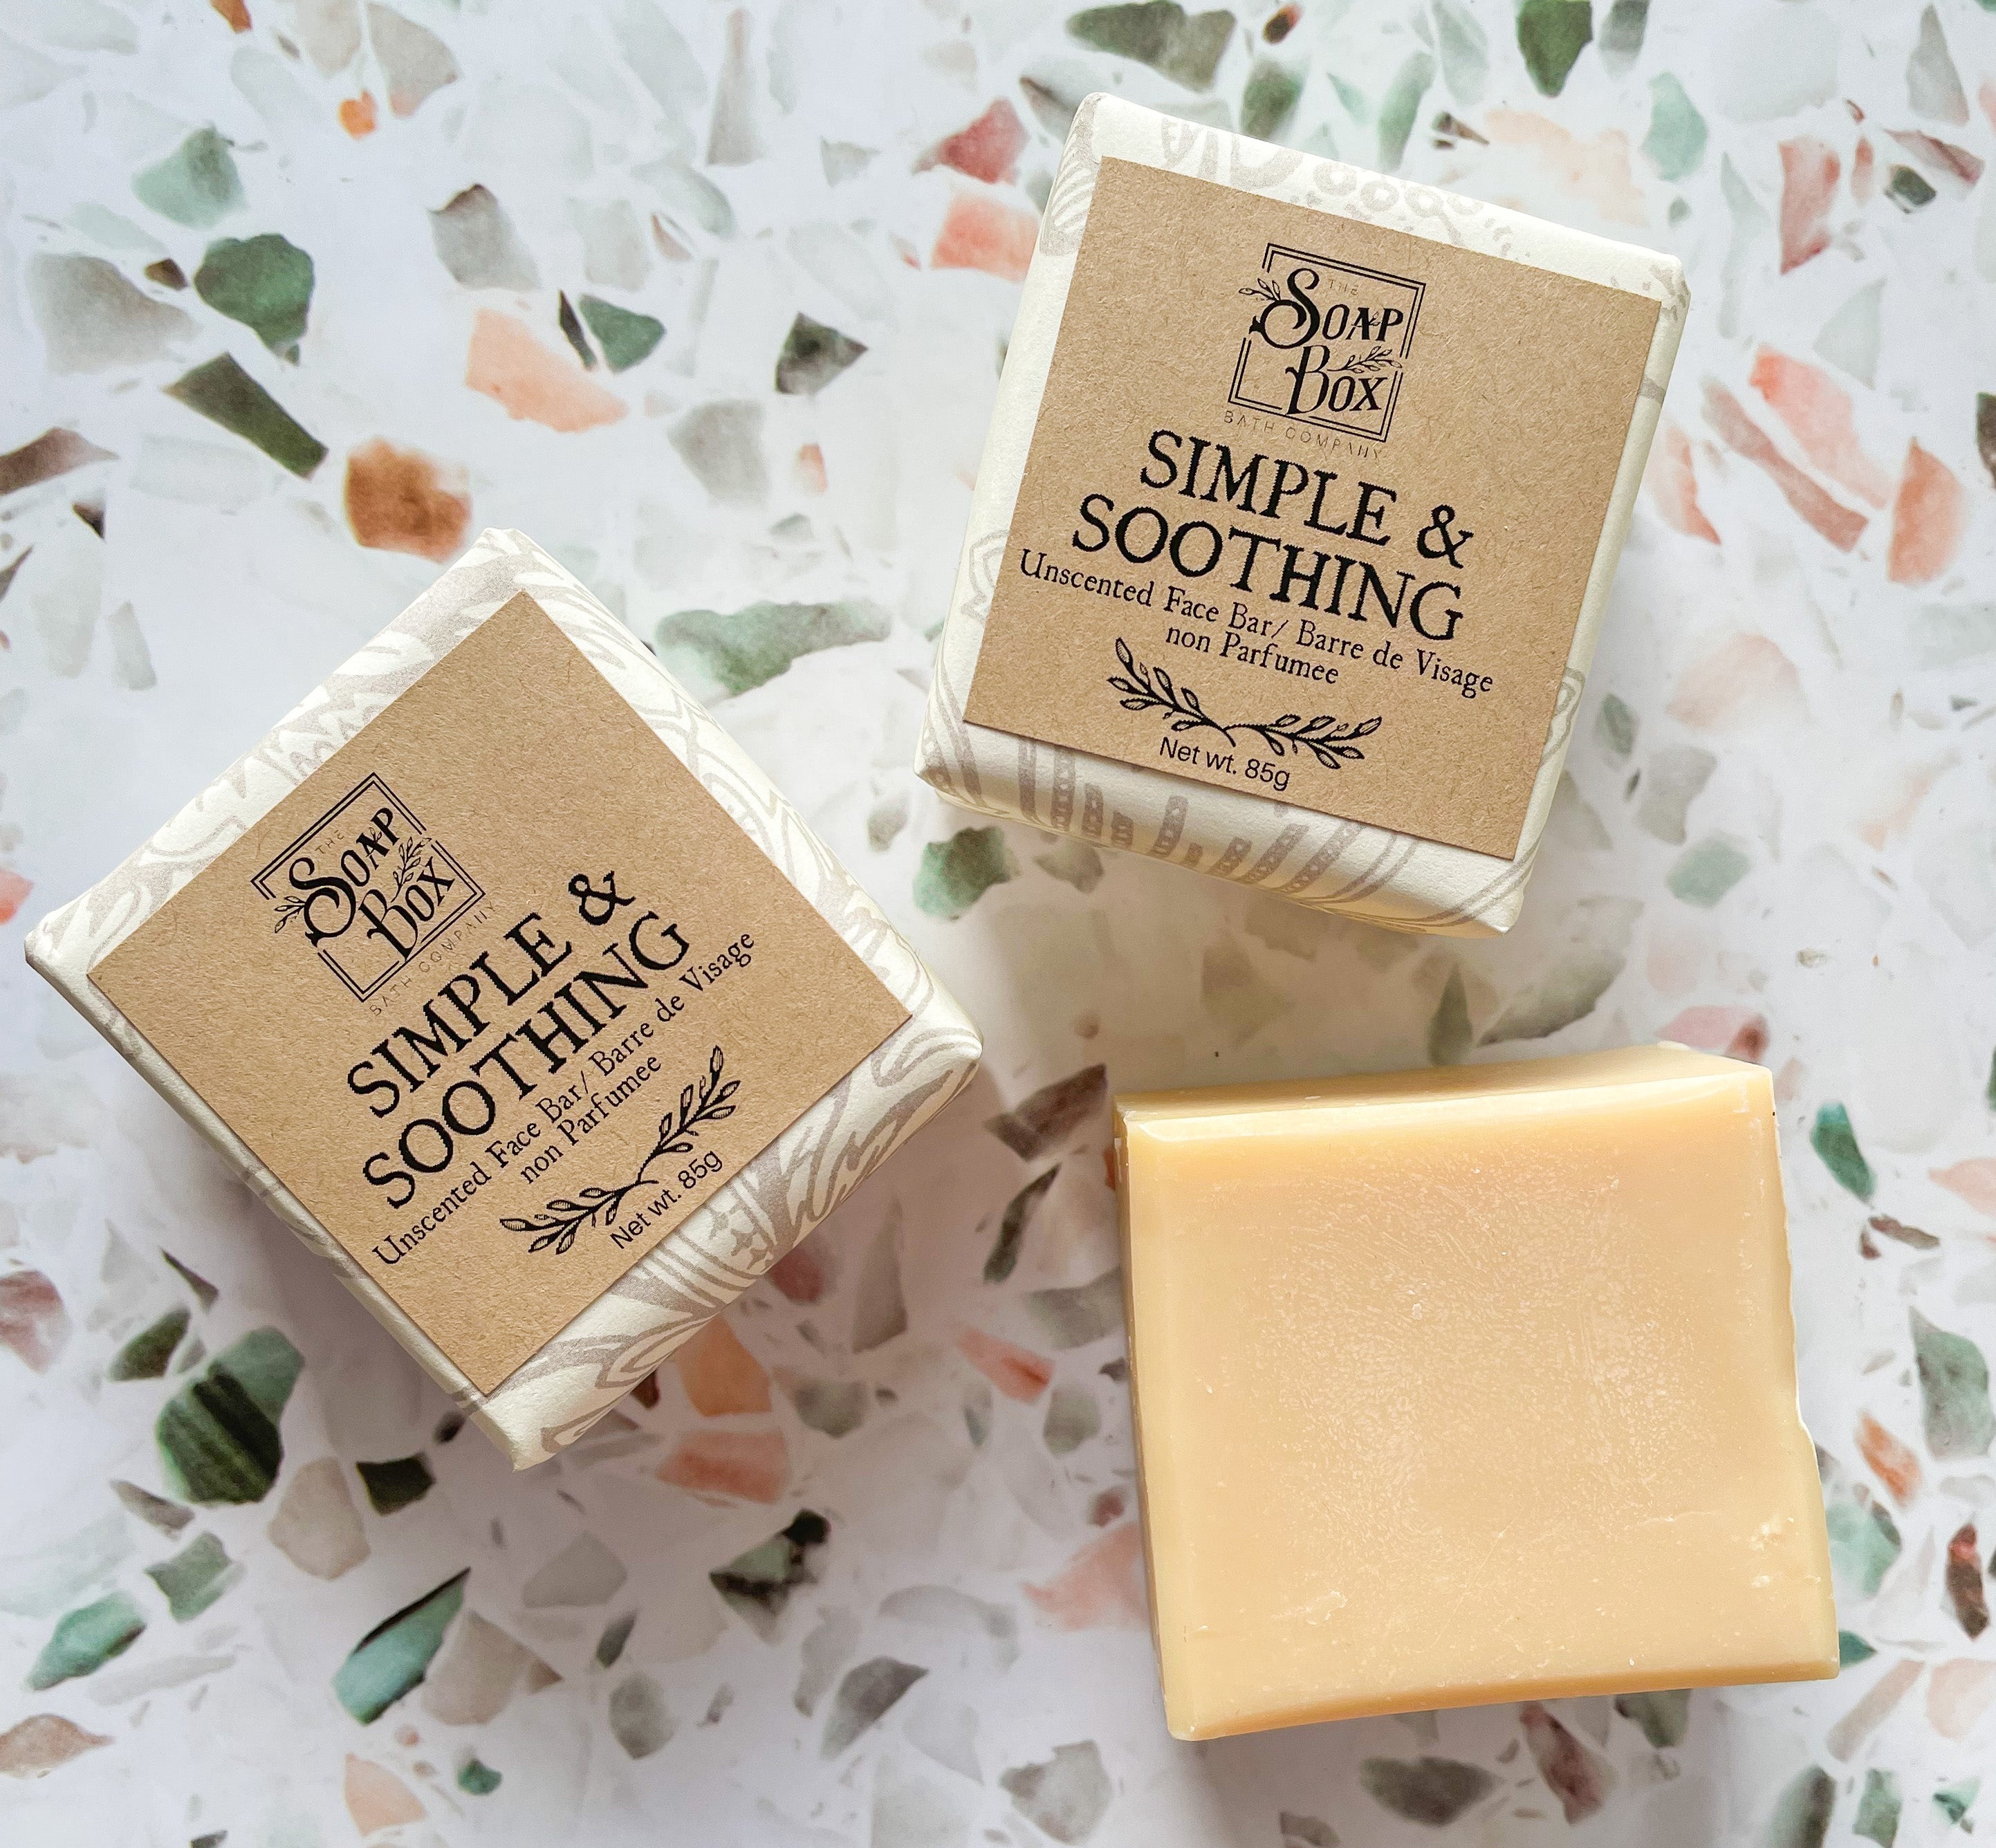 Simple & Soothing Unscented Facial Cleansing Bar